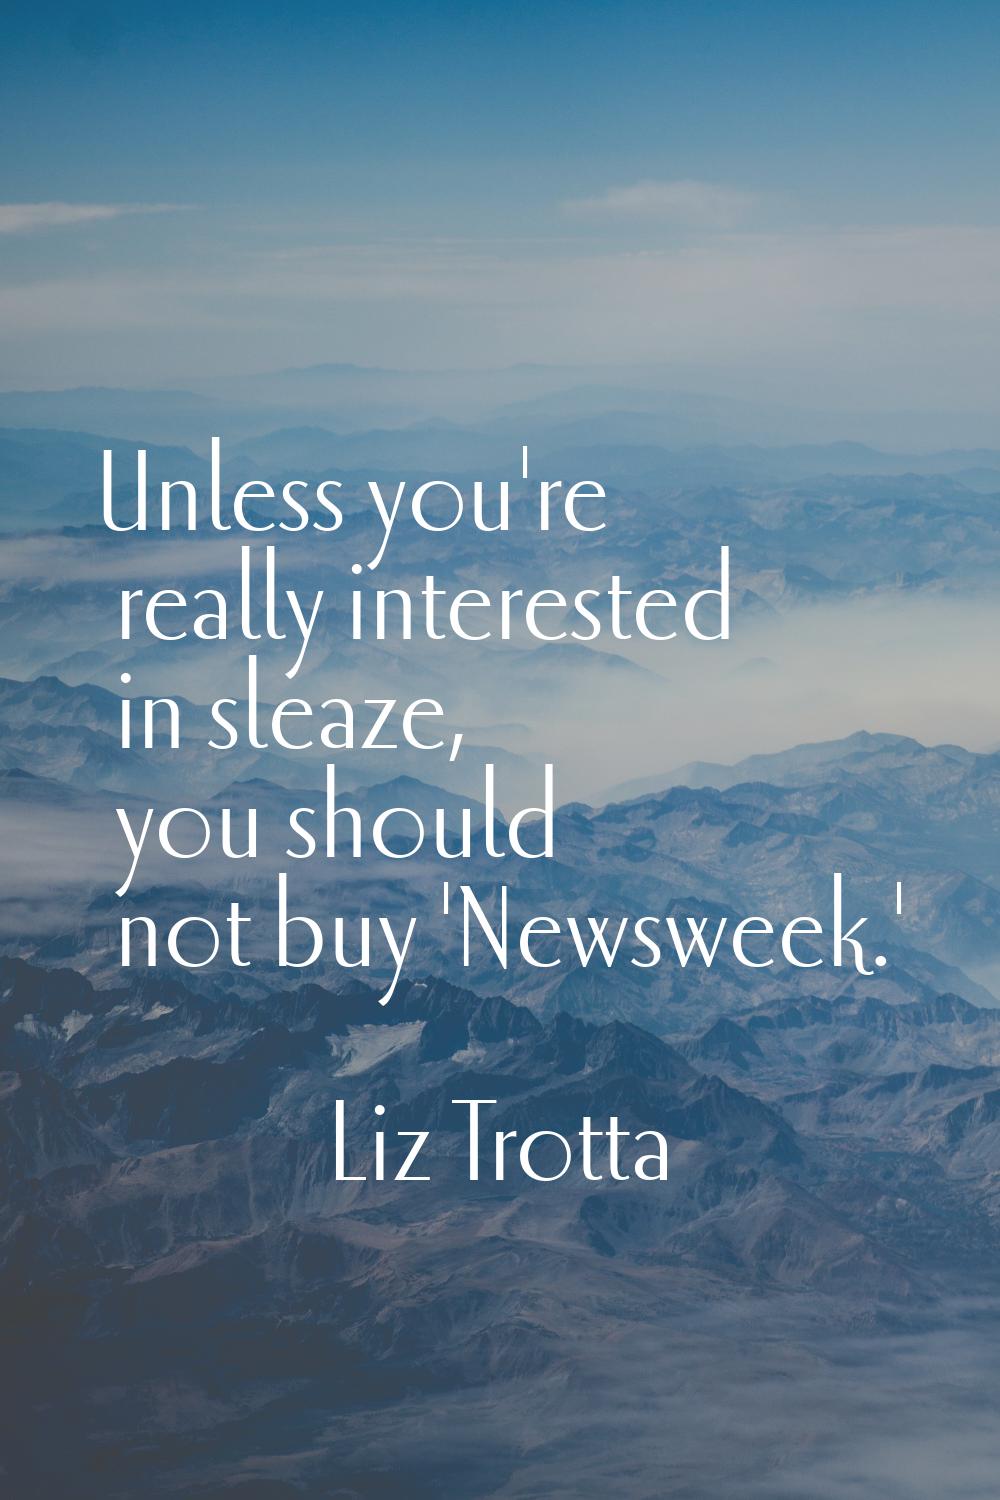 Unless you're really interested in sleaze, you should not buy 'Newsweek.'